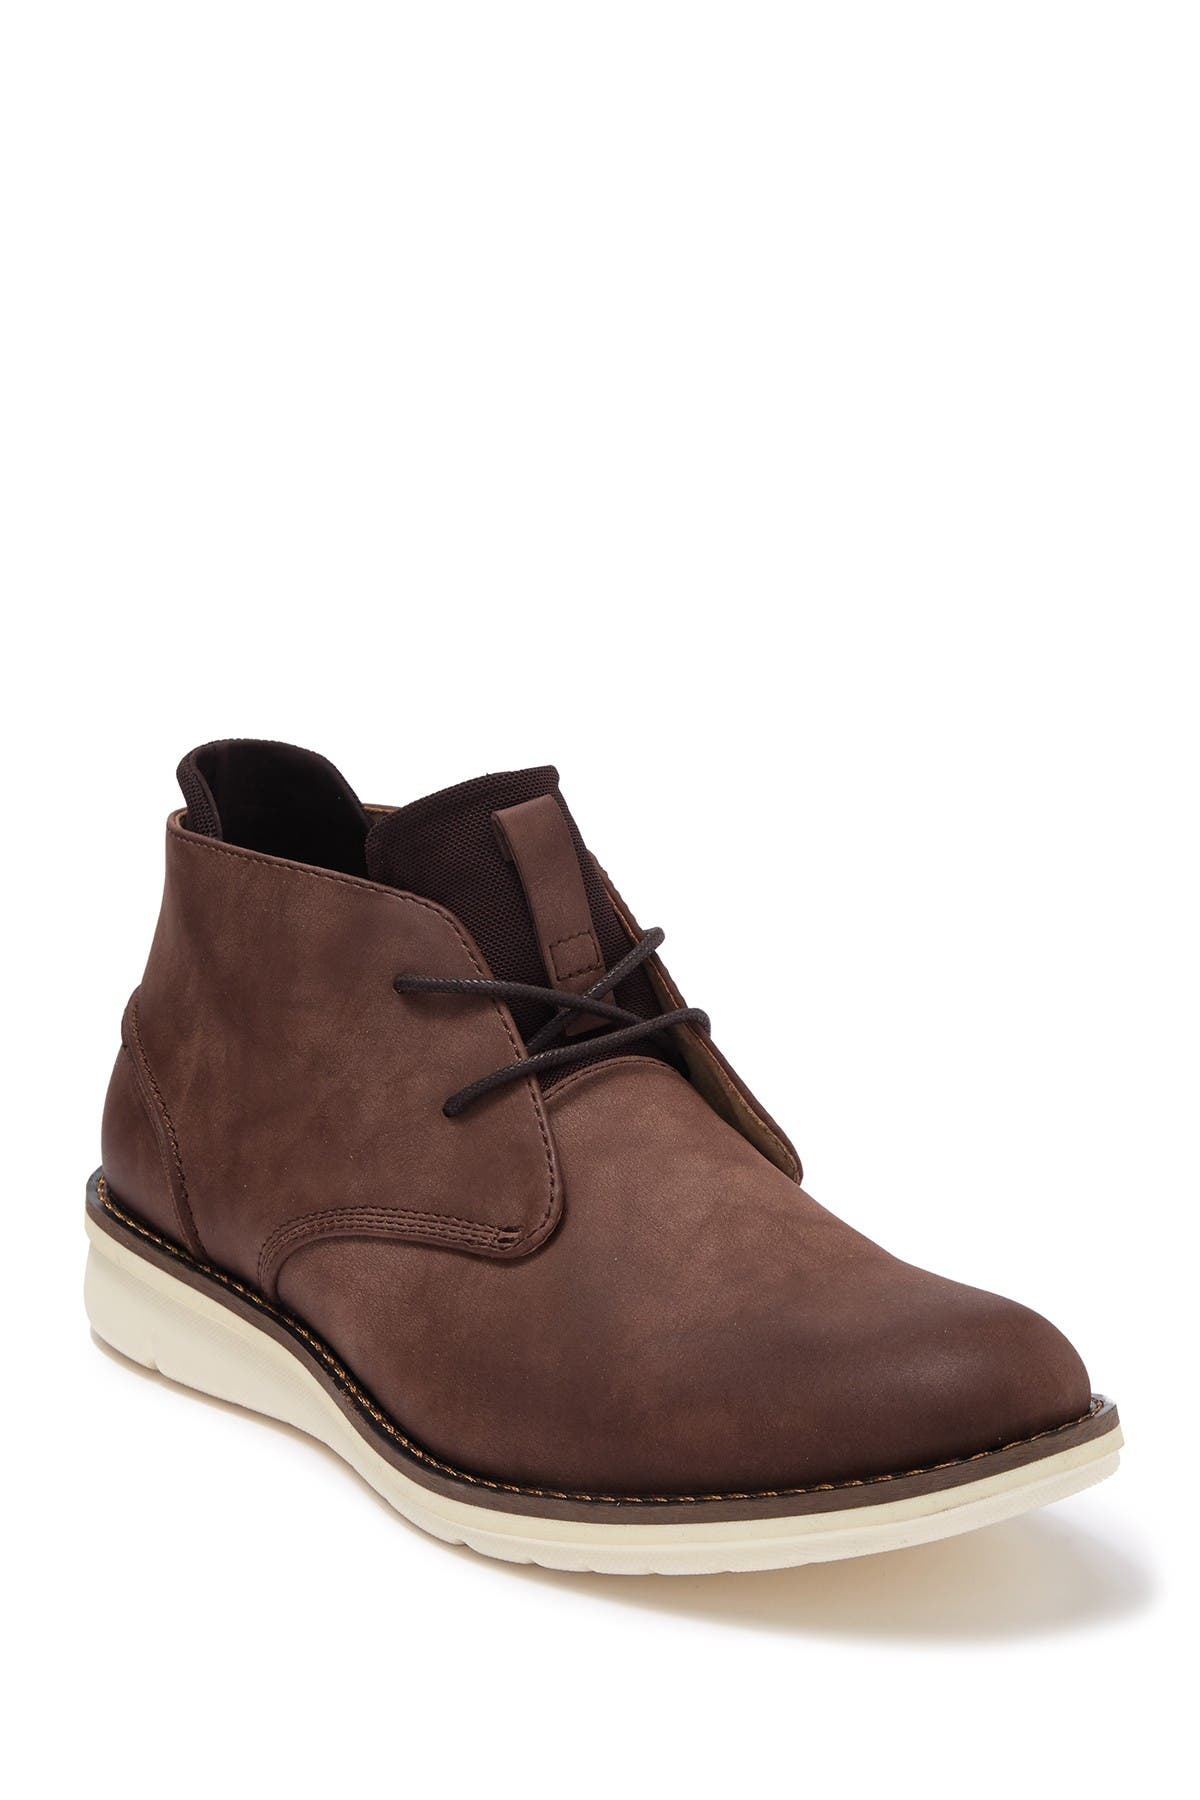 Kenneth Cole Reaction | Design Lined Chukka Boot | Nordstrom Rack